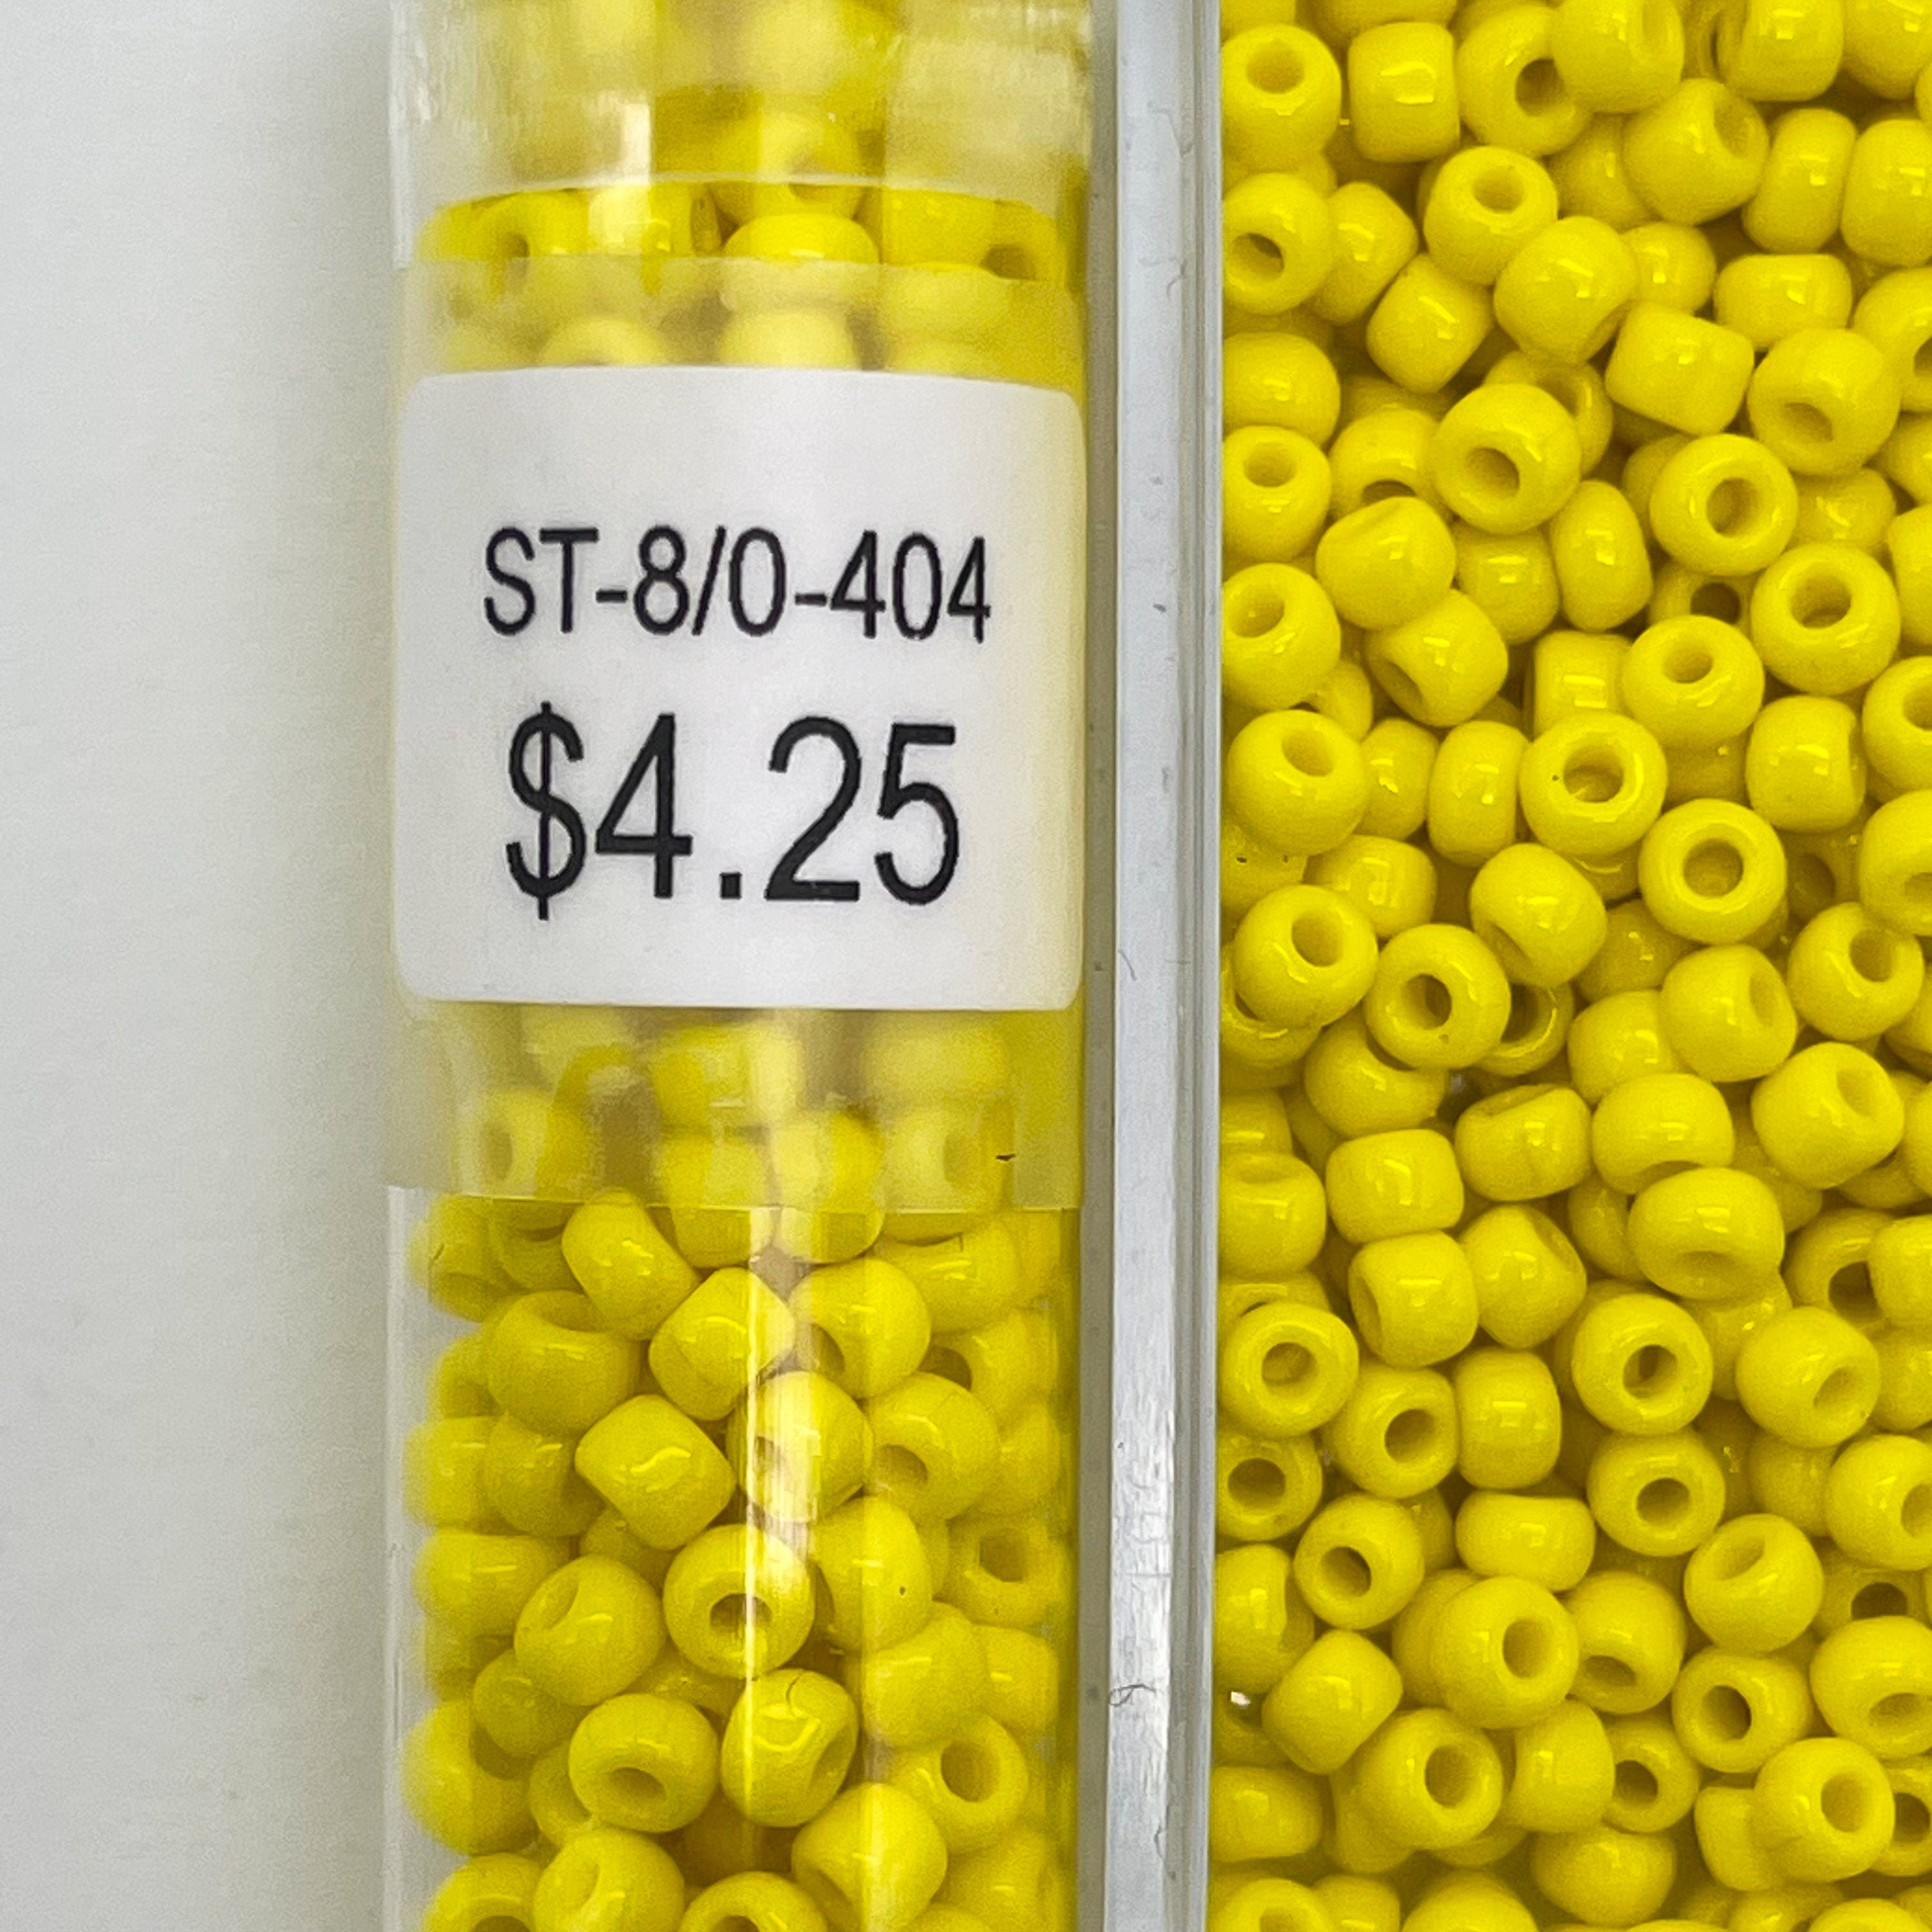 Japanese Glass Seed Beads Size 8/0-404 Opaque Yellow – Ayla's 